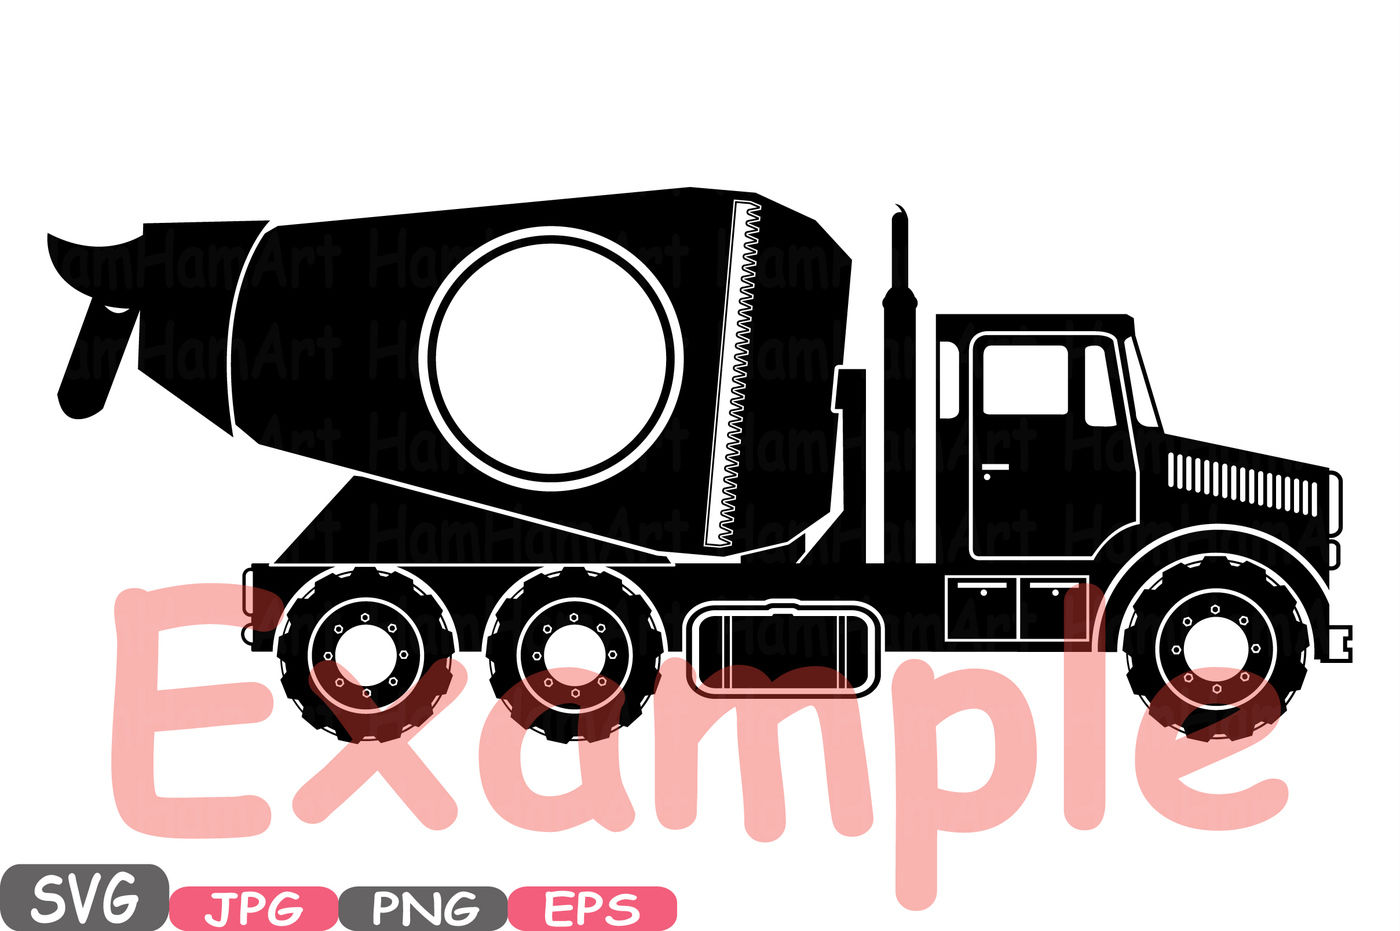 Construction Machines Circle Split Silhouette Svg File Cutting Files Dump Trucks Toy Toys Cars Excavator Stickers Builders Clipart 555s By Hamhamart Thehungryjpeg Com